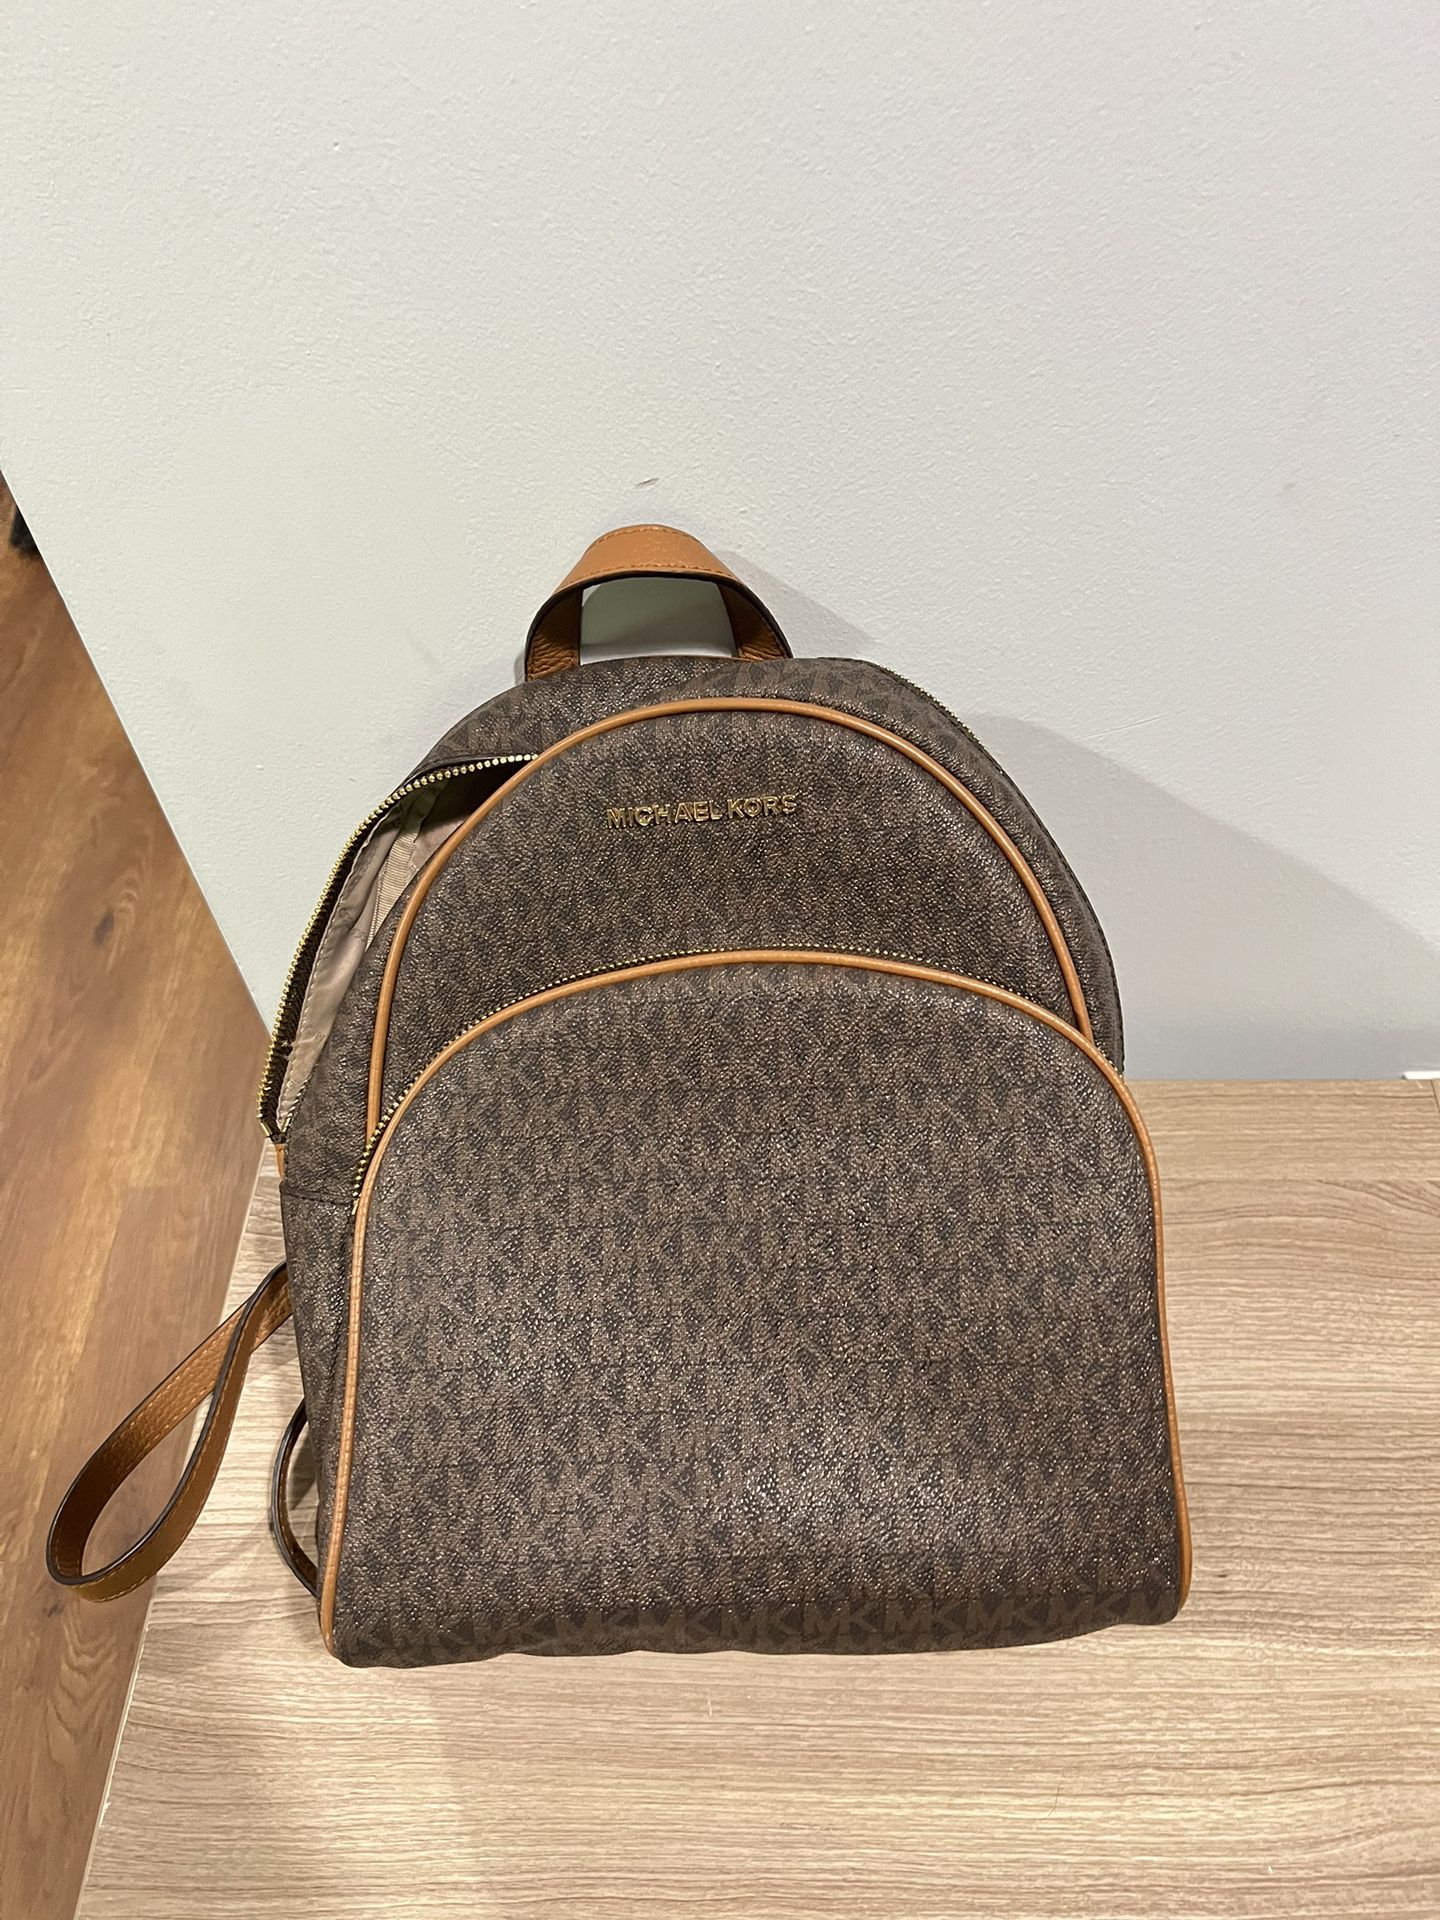 Michael Kors Backpack for Sale in Columbia, MD - OfferUp